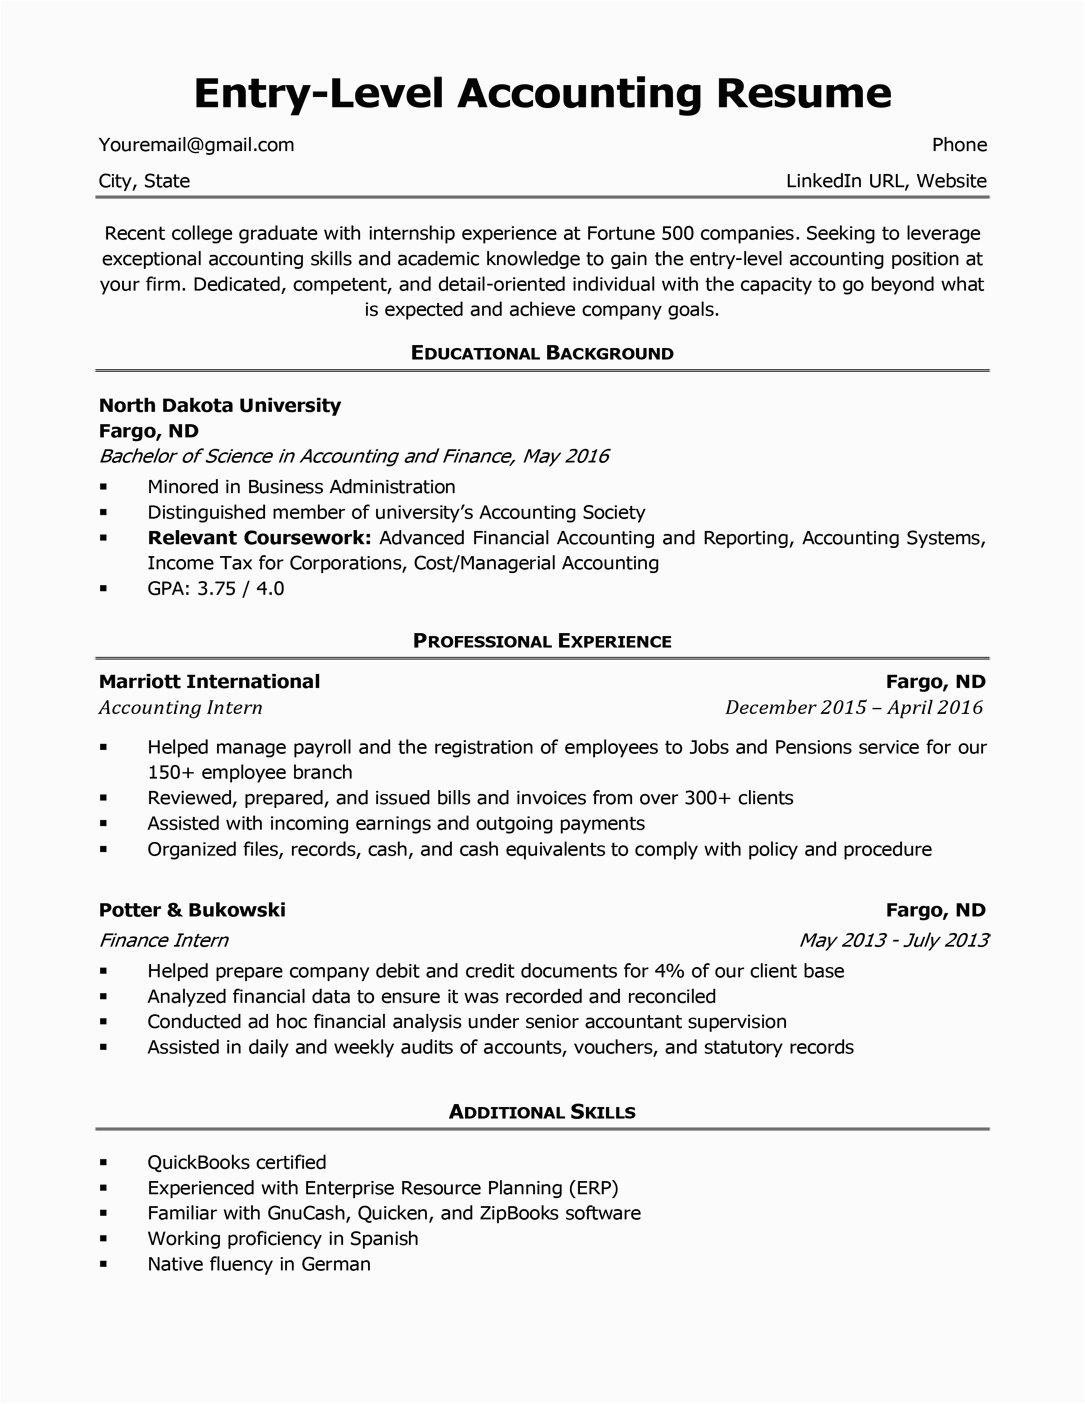 Sample Entry Level Accounting Resume No Experience Entry Level Resume Examples with No Work Experience